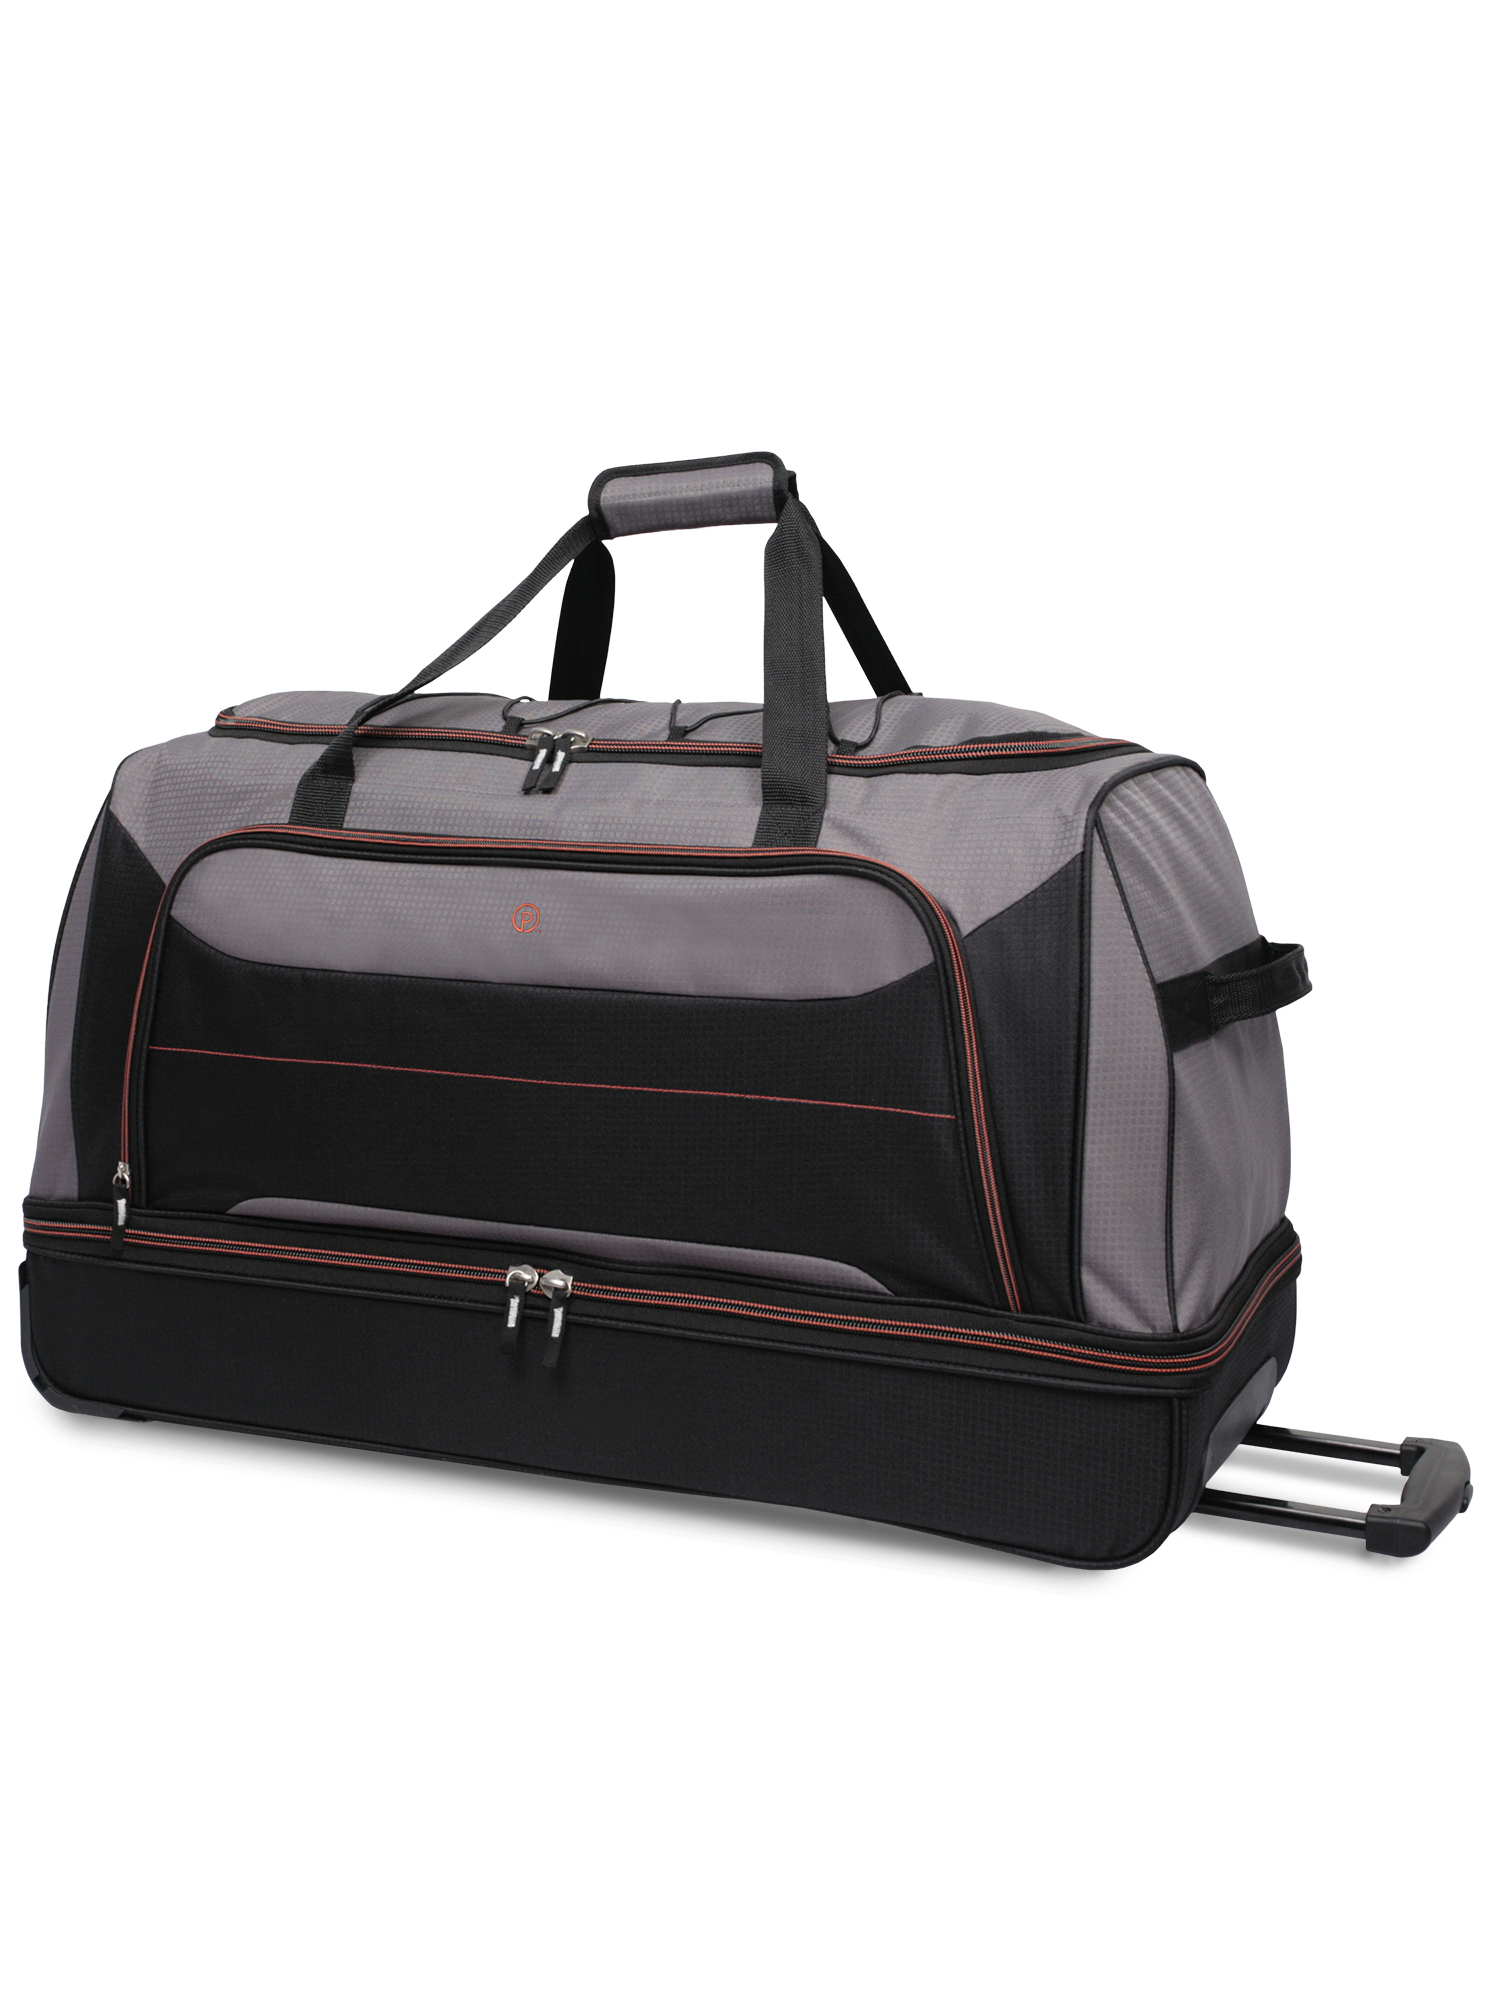 Protege Rolling Drop-Bottom Duffel Bag for Travel, 30 in, Black and ...